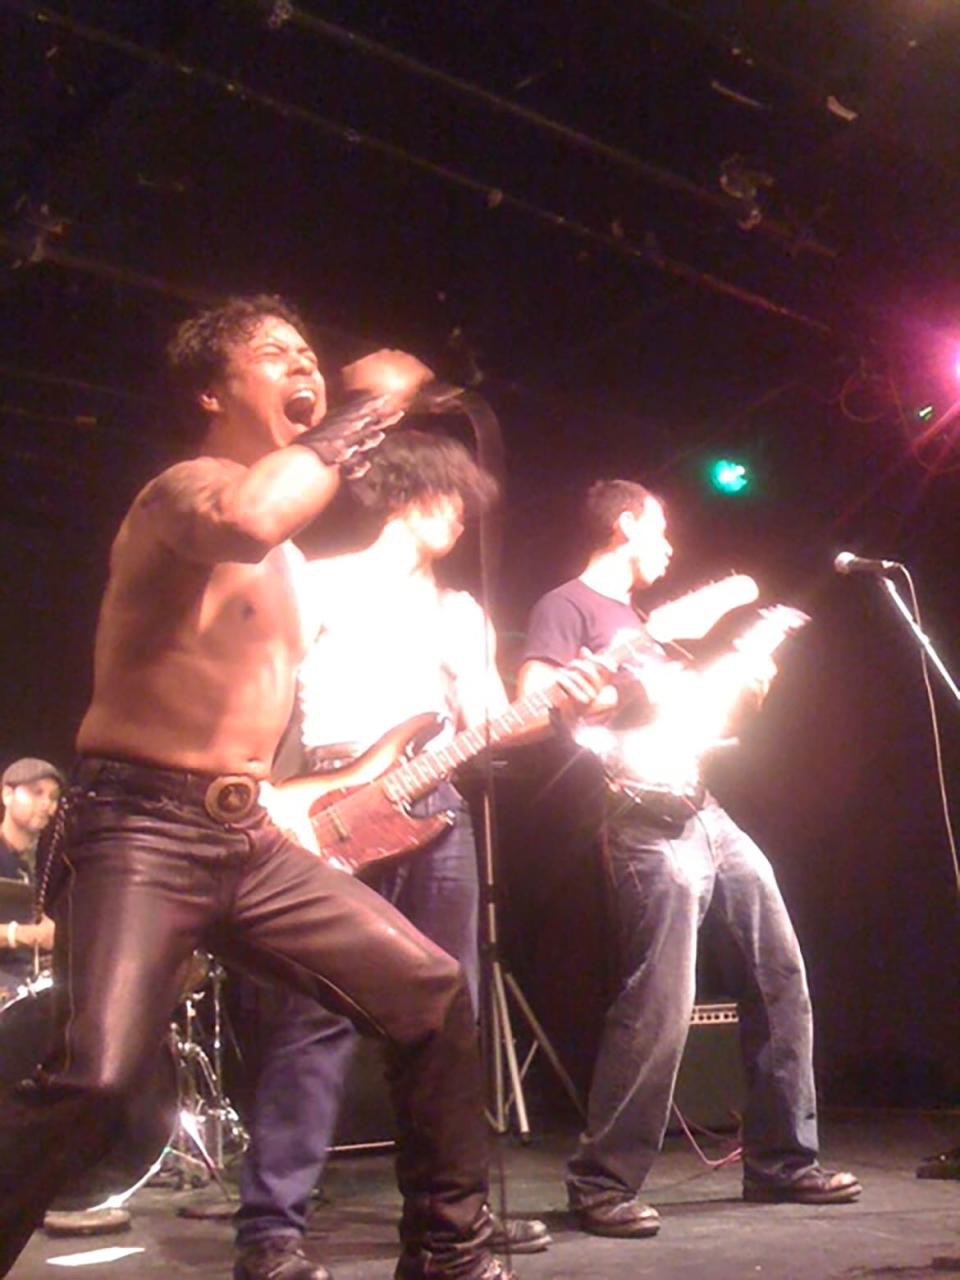 <div class="inline-image__caption"><p>David Anzuelo singing with his band, MonsterRally circa 2007. To his right on bass is actor Raul Castillo. </p></div> <div class="inline-image__credit">Courtesy of David Anzuelo</div>